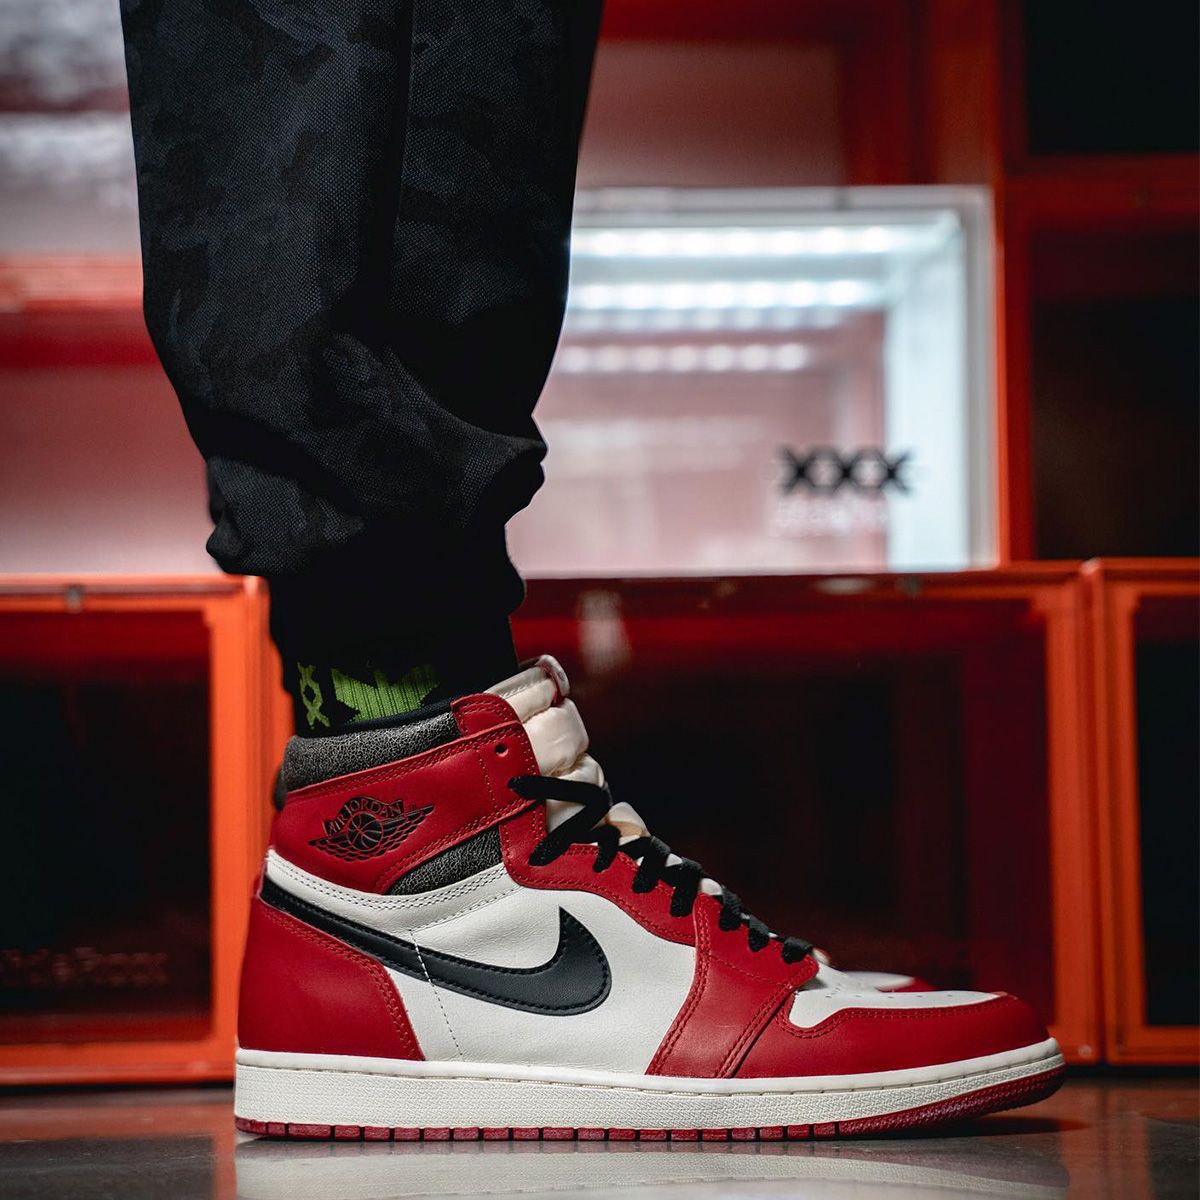 Where to Buy the Air Jordan 1 High OG “Lost and Found” | House of